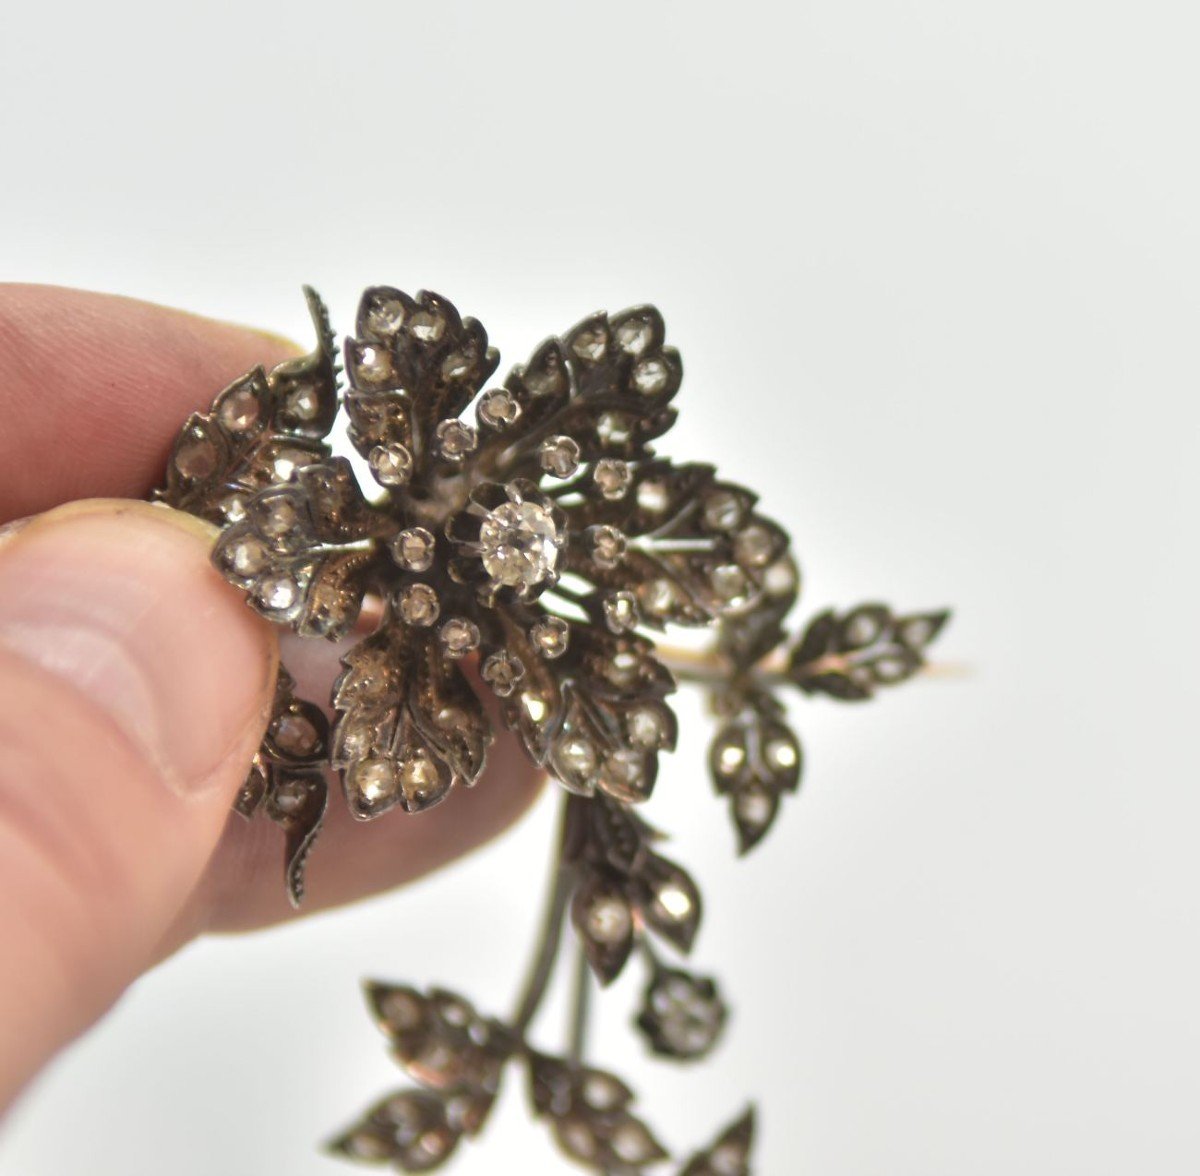 Trembleuse Brooch In Gold And Silver Composed Of 4 Articulated Strands And 1 Floral Pattern-photo-4